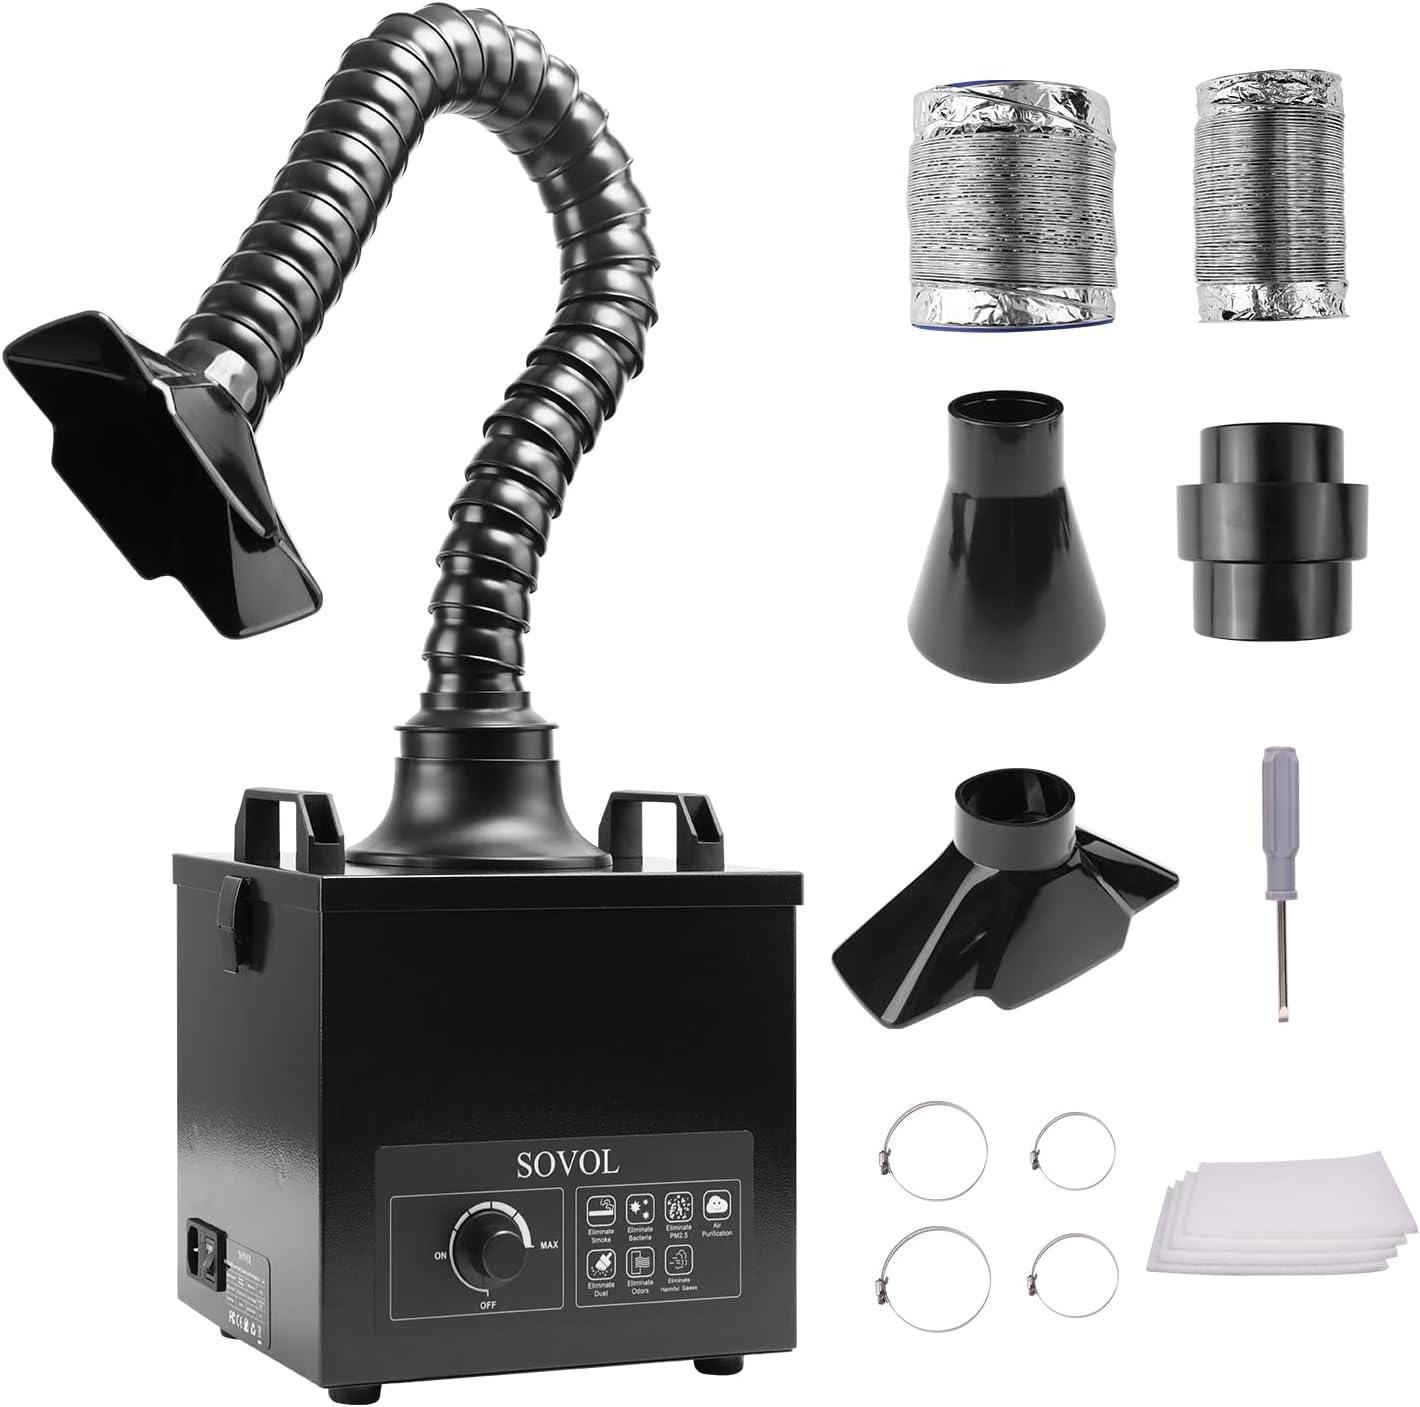 Sovol Solder Fume Extractor, 100W Suction Smoke Absorber Remover with Air Volume 200m³/h, 3-Stage Filtration, 2 shapes of Smoke Hoods and 3 Exhaust Hoses for Welding Smoke Absorption Soldering - SOVOL Offical Website